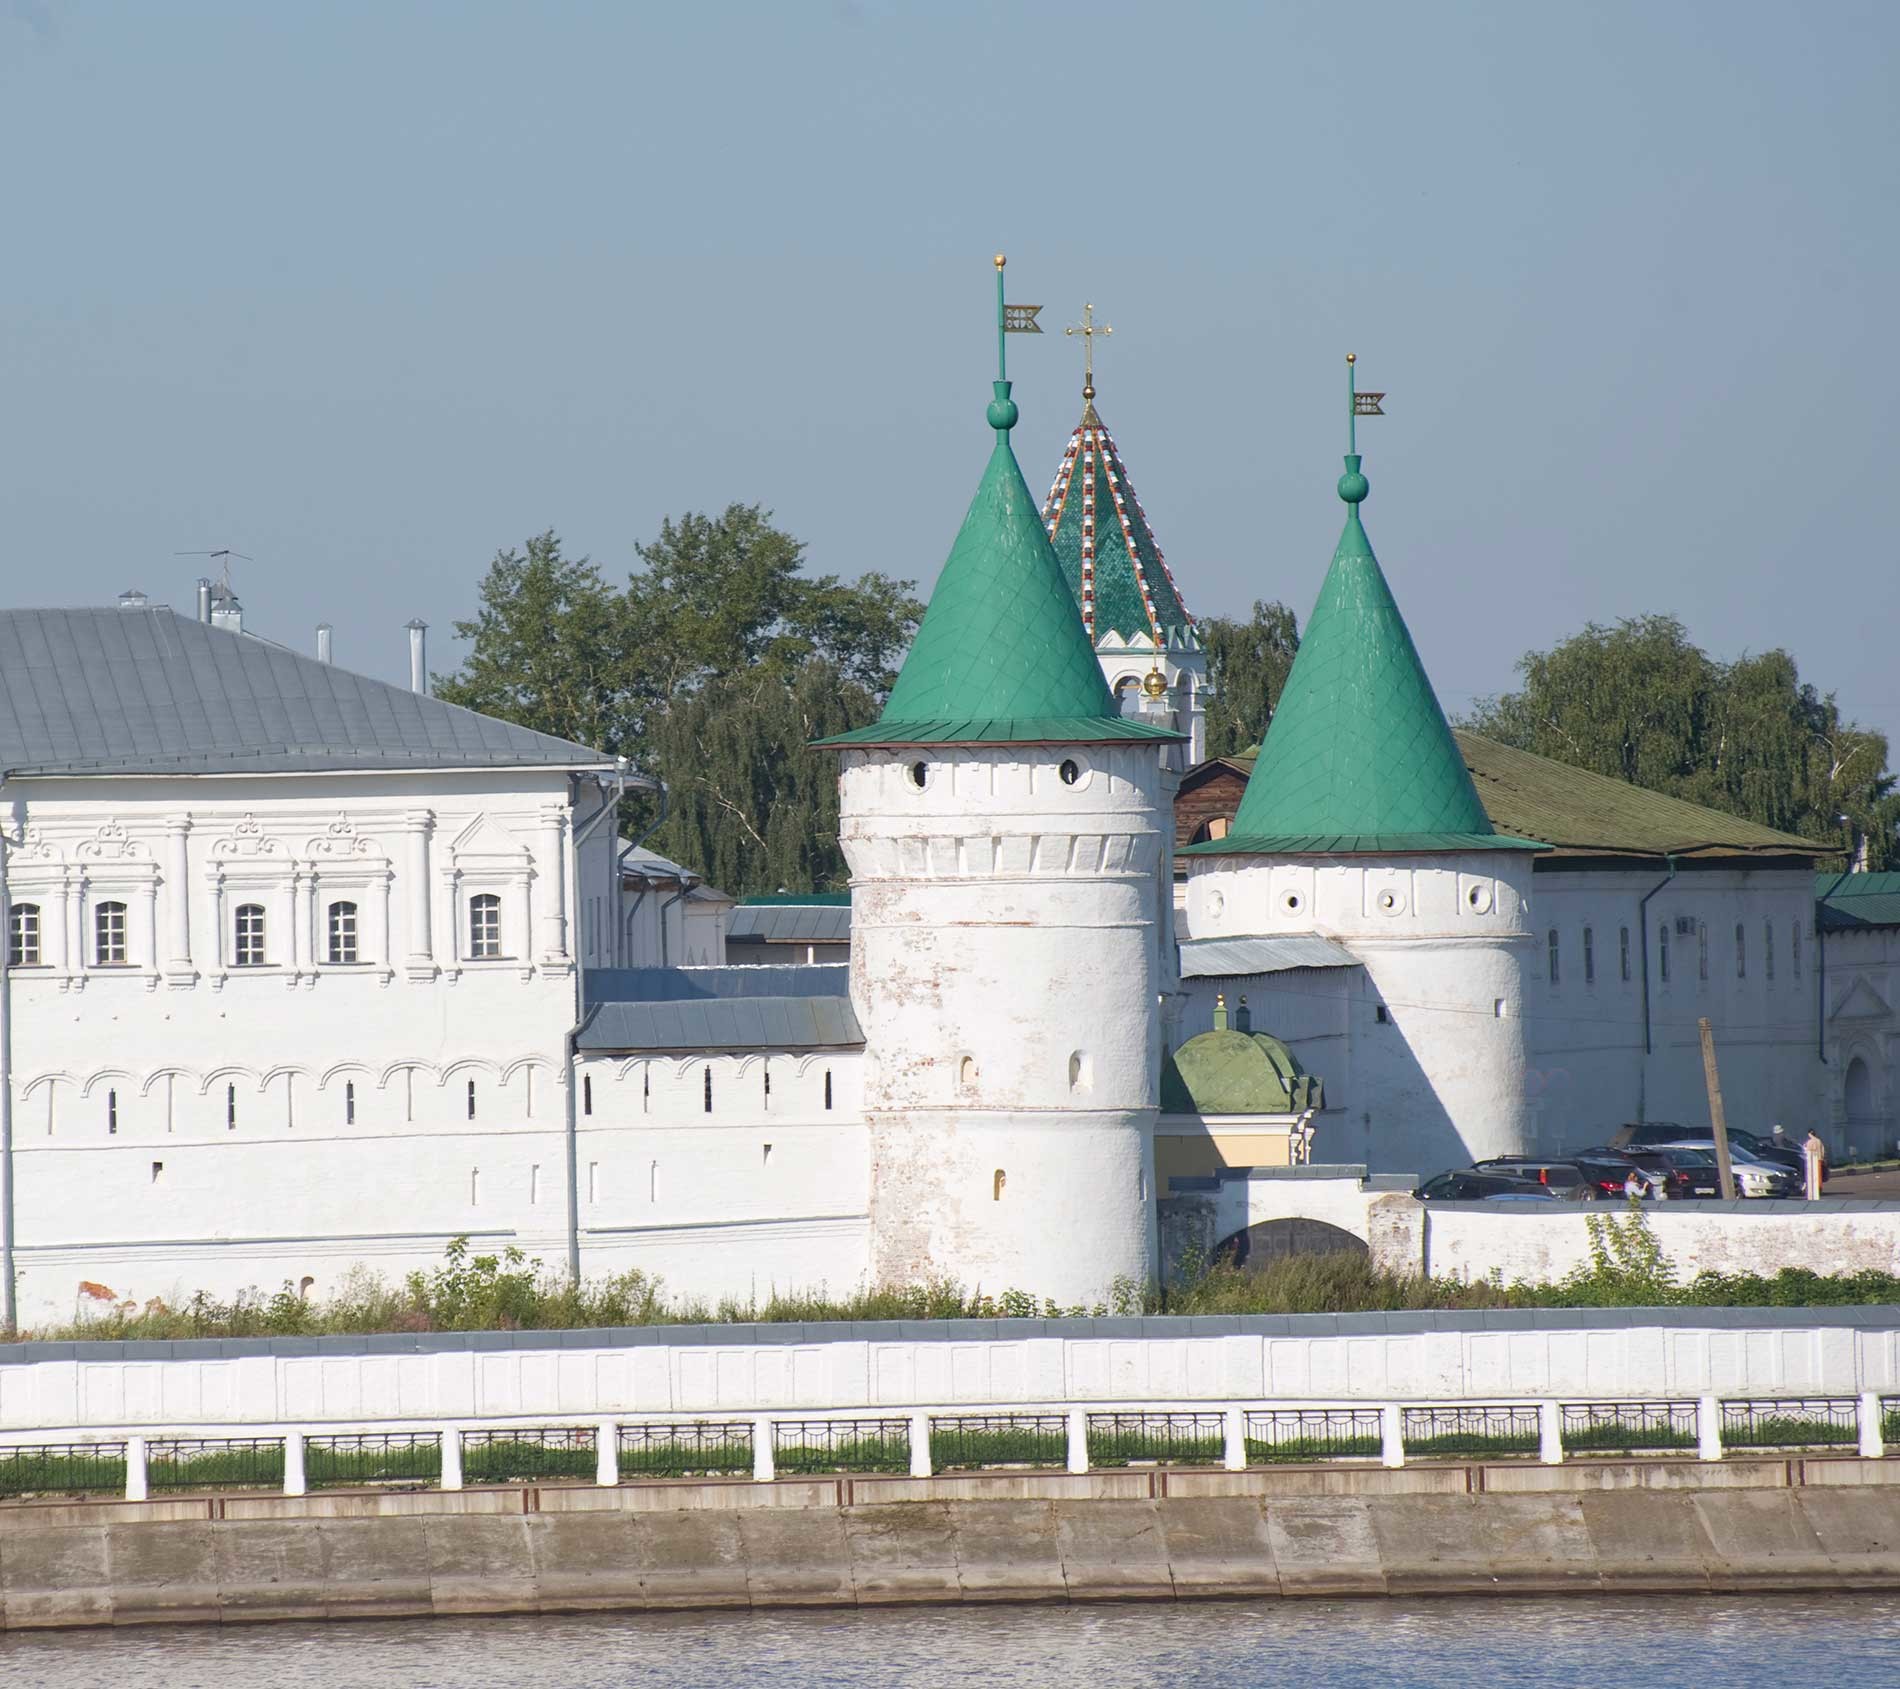 Trinity-Ipatiev Monastery, east view across Kostroma River. From left: Archbishop's Cloisters; Powder Tower; Green Tower (background); Catherine (North) Gate; Smithy Tower. Aug. 13, 2017.